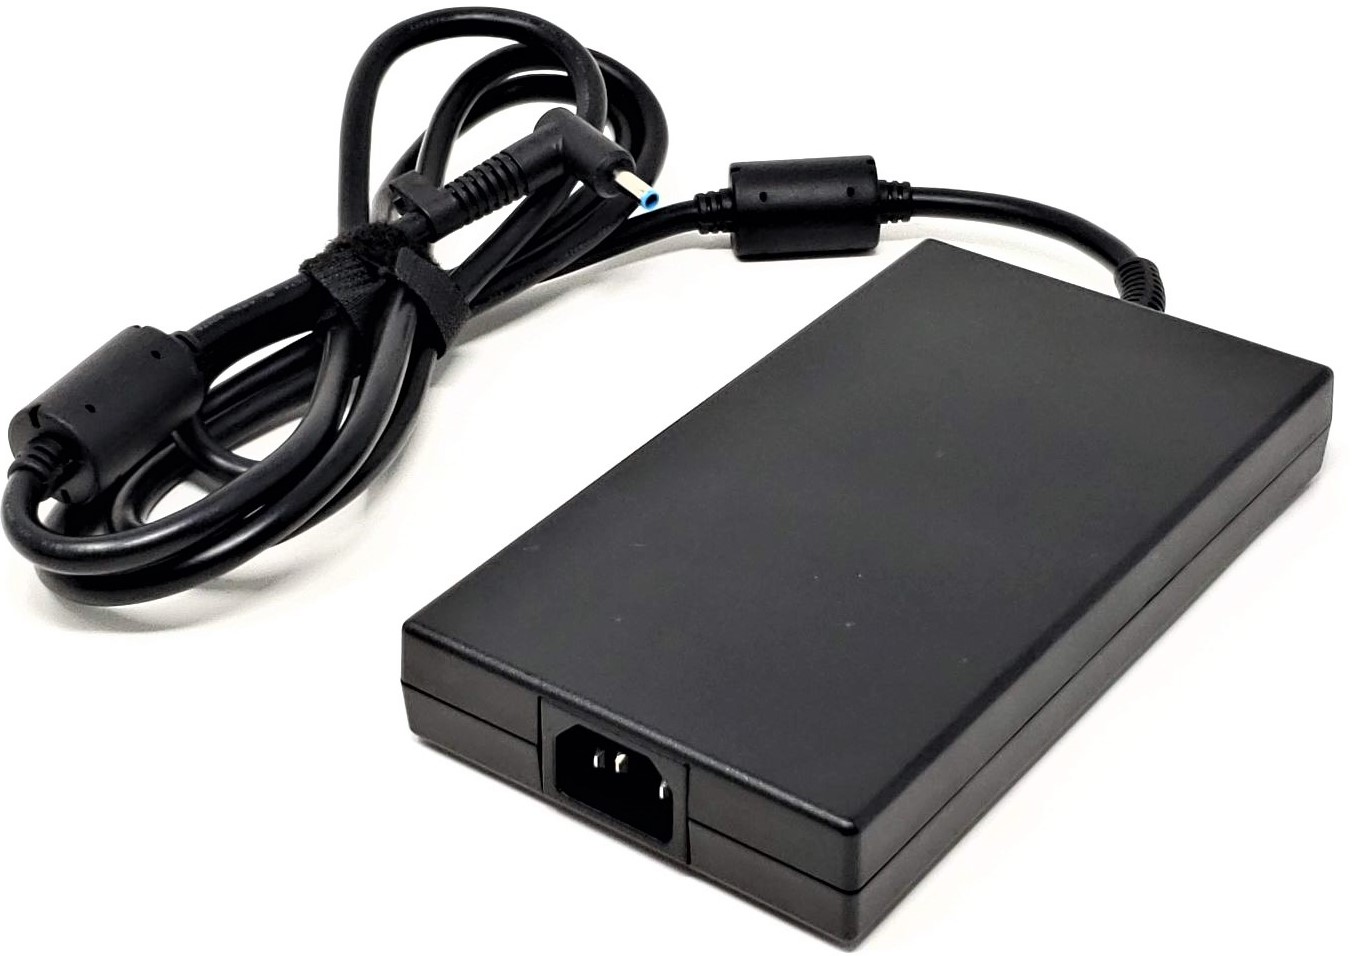 65W 90-N6APW2000 Laptop Adapter Compatibility Asus A52F X58L A53E N17908 V85